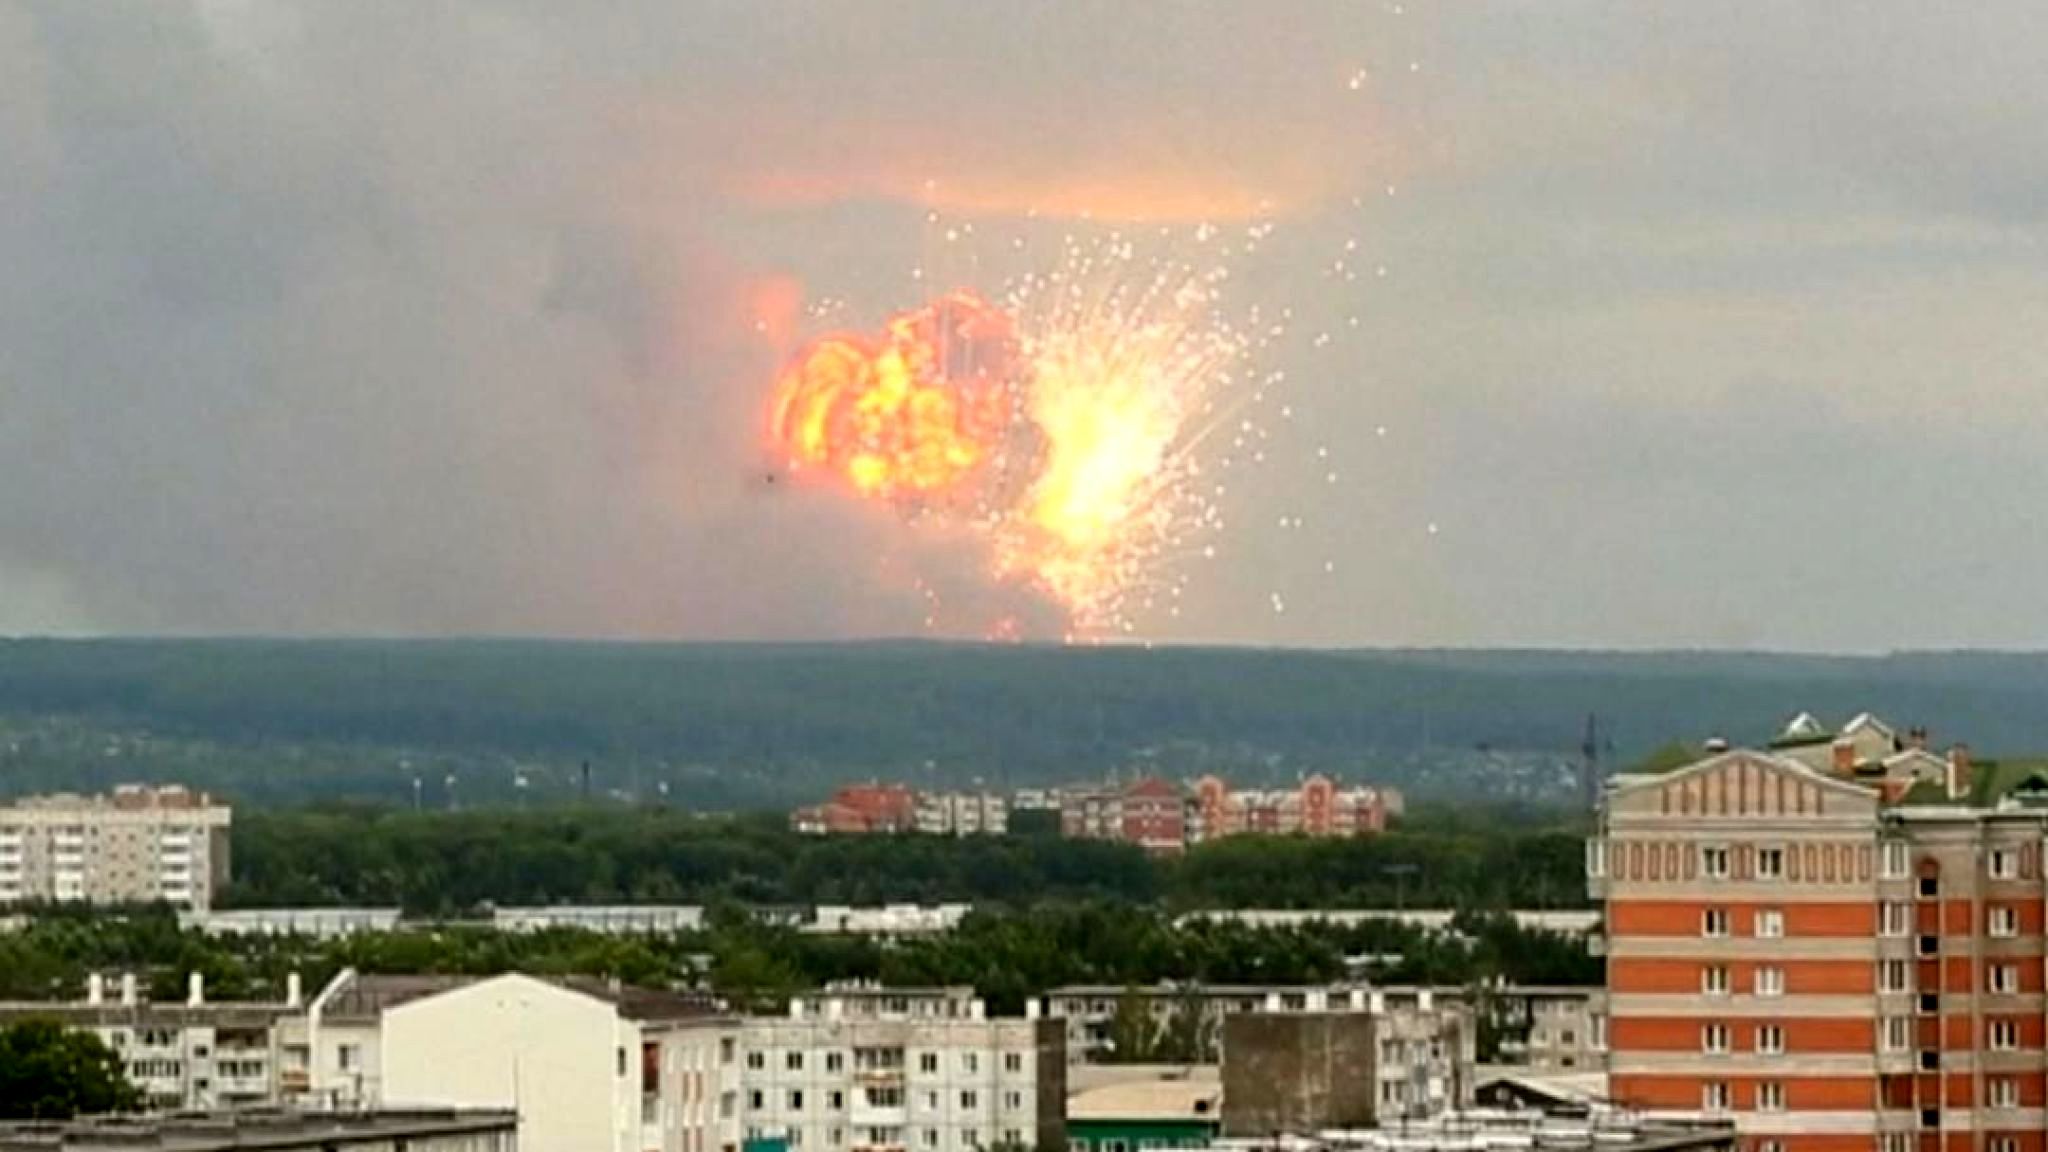  Russia’s military depot fire left 12 injured, 1 missing